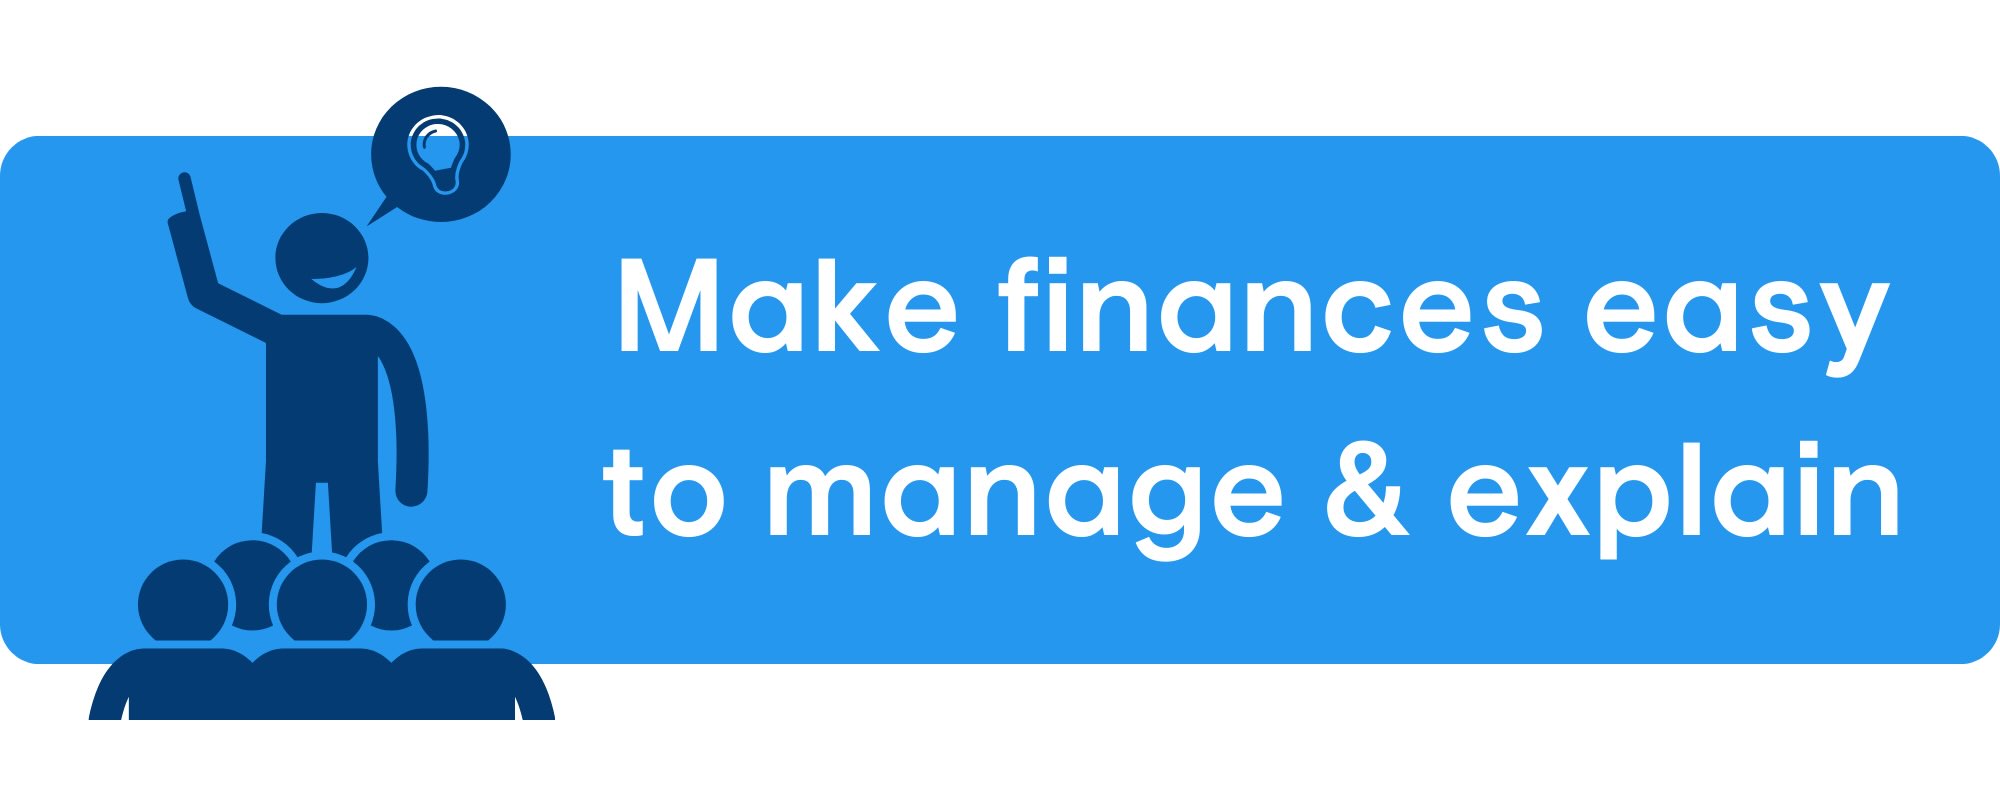 Simplify your church finances to make it easier to manage and explain